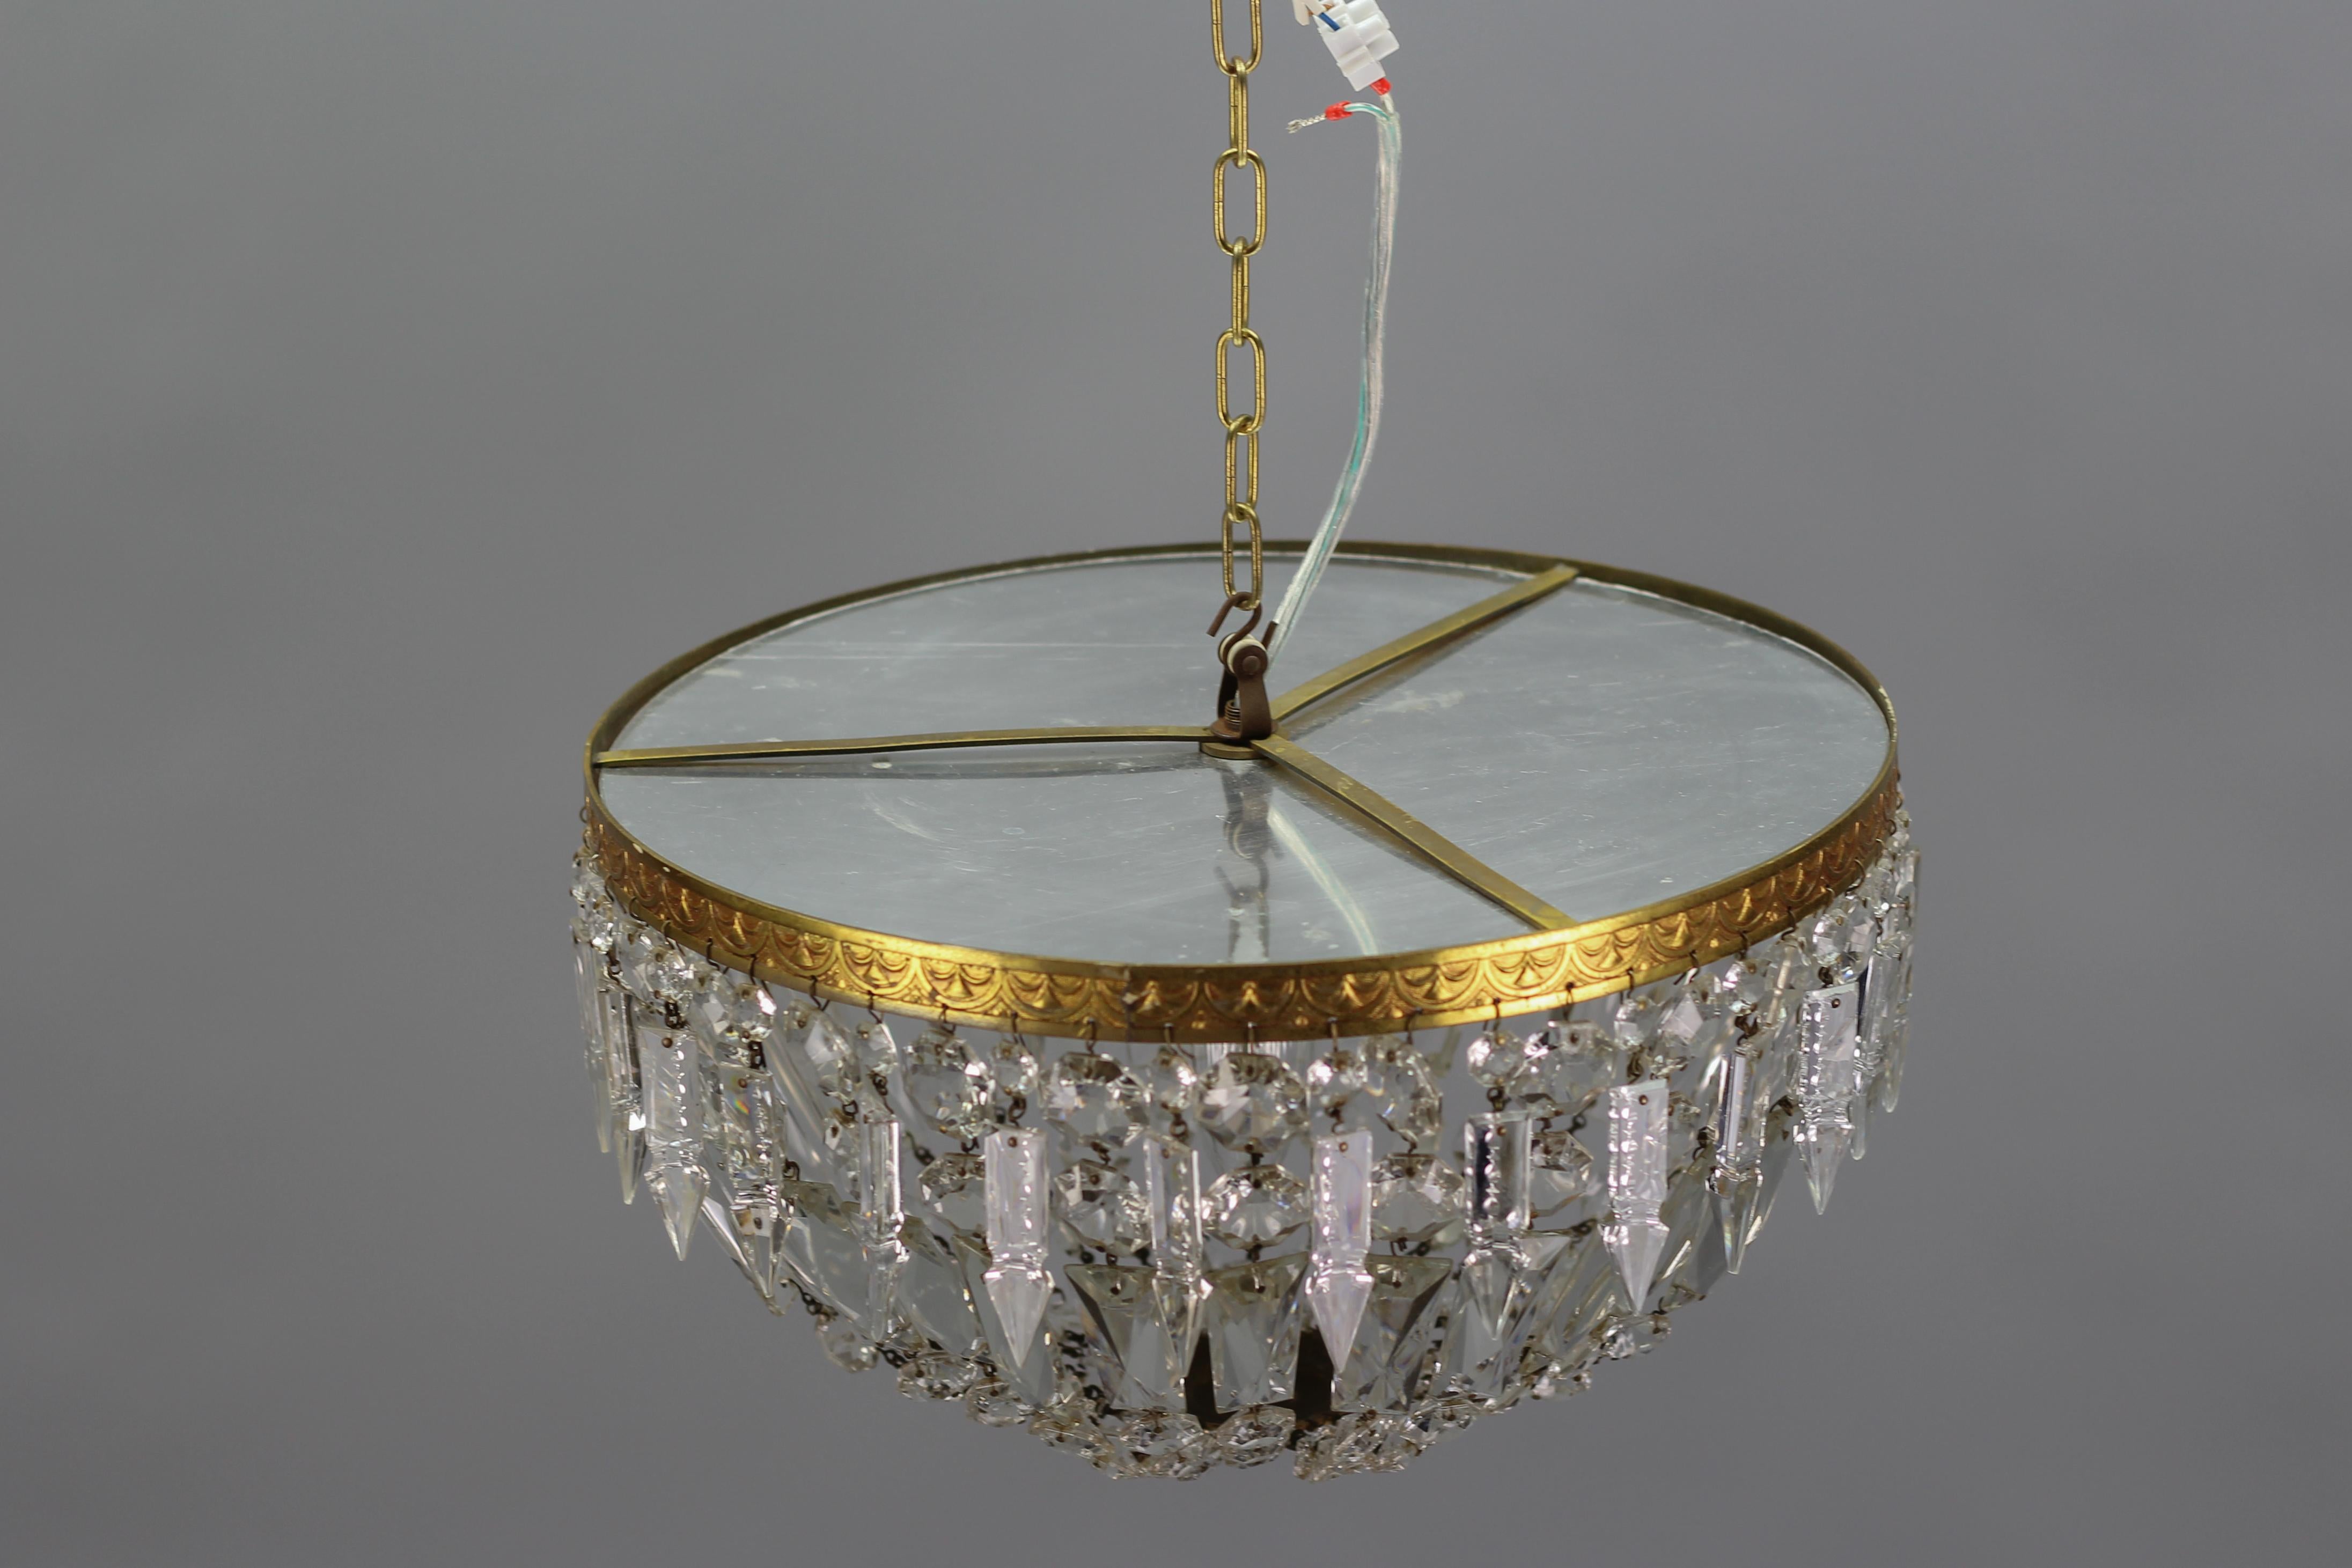 French Art Deco Style Crystal Glass and Brass Basket Ceiling Light Fixture 7